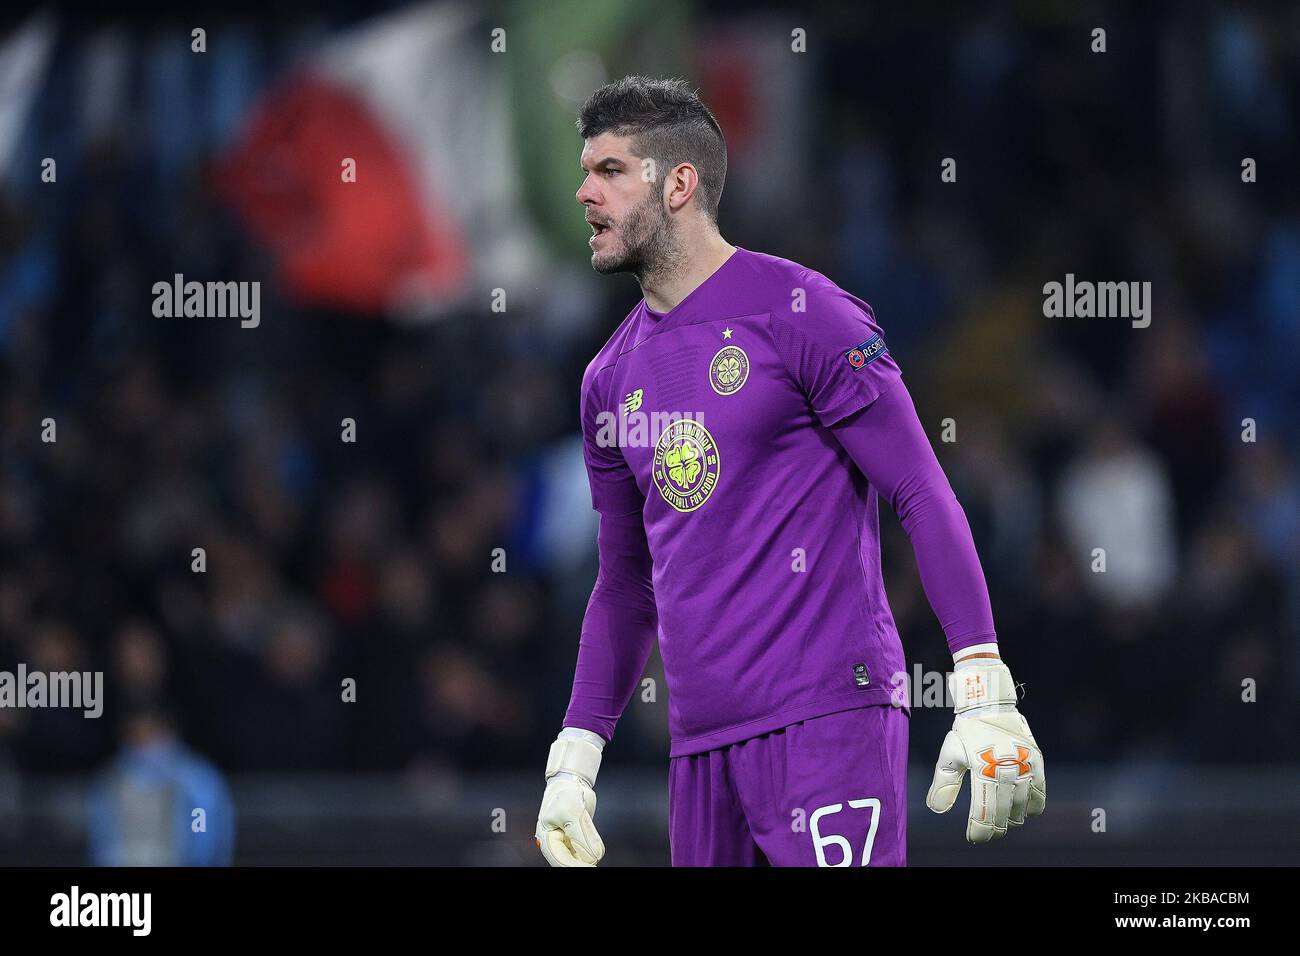 Fraser Forster of Celtic during the UEFA Europa League group stage match between Lazio and Celtic at Stadio Olimpico, Rome, Italy. (Photo by Giuseppe Maffia/NurPhoto) Stock Photo